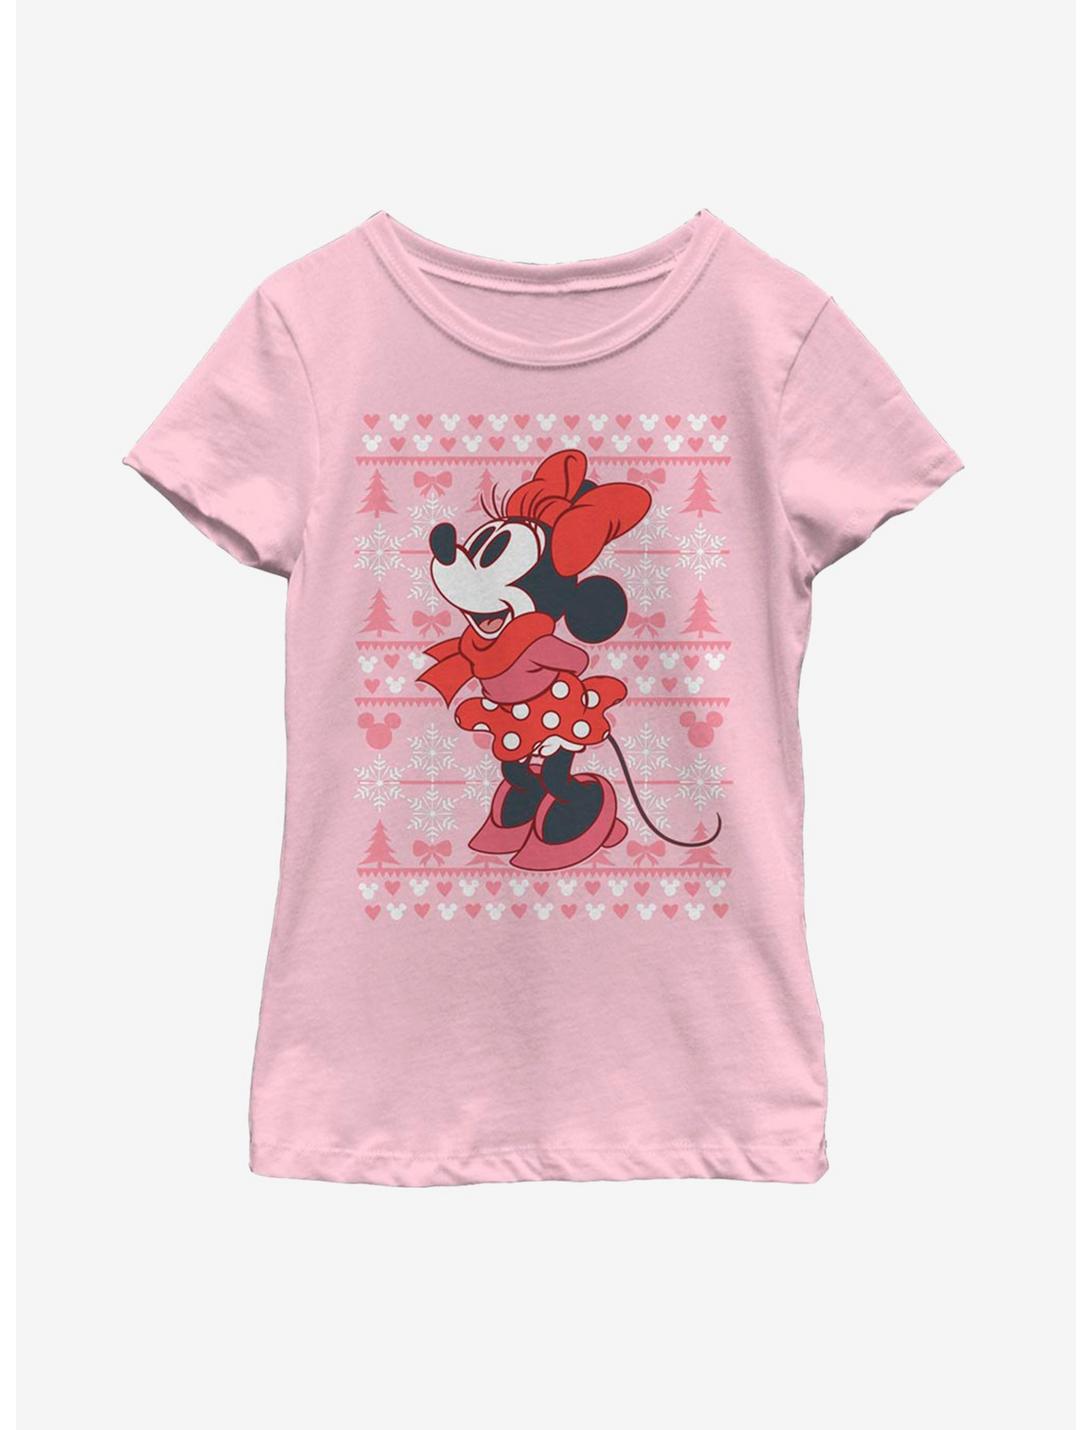 Disney Mickey Mouse Minnie Winter Christmas Pattern Youth Girls T-Shirt, PINK, hi-res